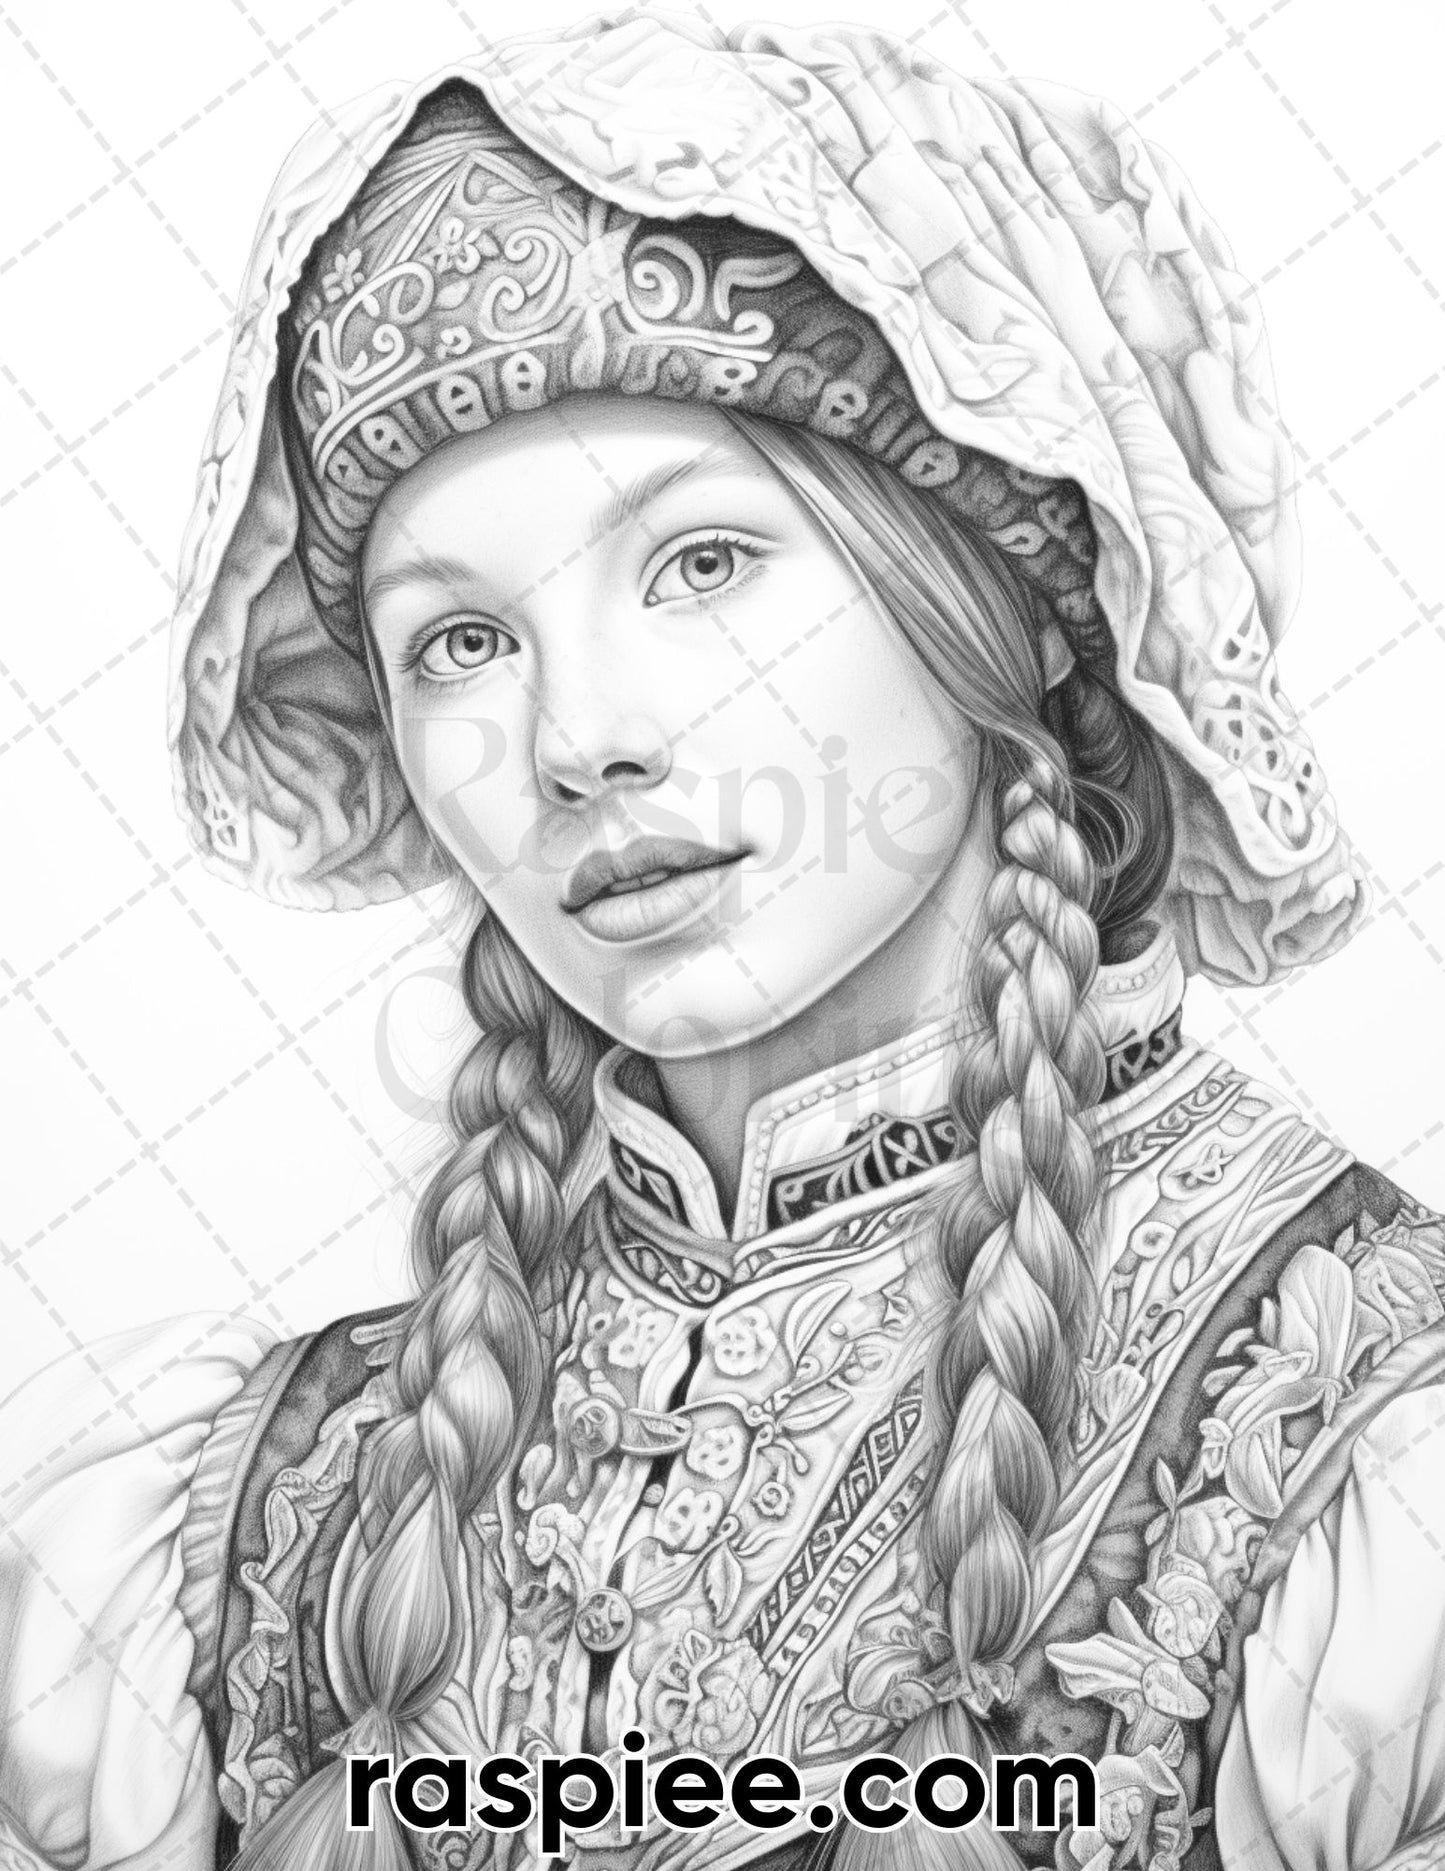 adult coloring pages, adult coloring sheets, adult coloring book pdf, adult coloring book printable, grayscale coloring pages, grayscale coloring books, portrait coloring pages for adults, portrait coloring book, traditional swiss girls coloring pages